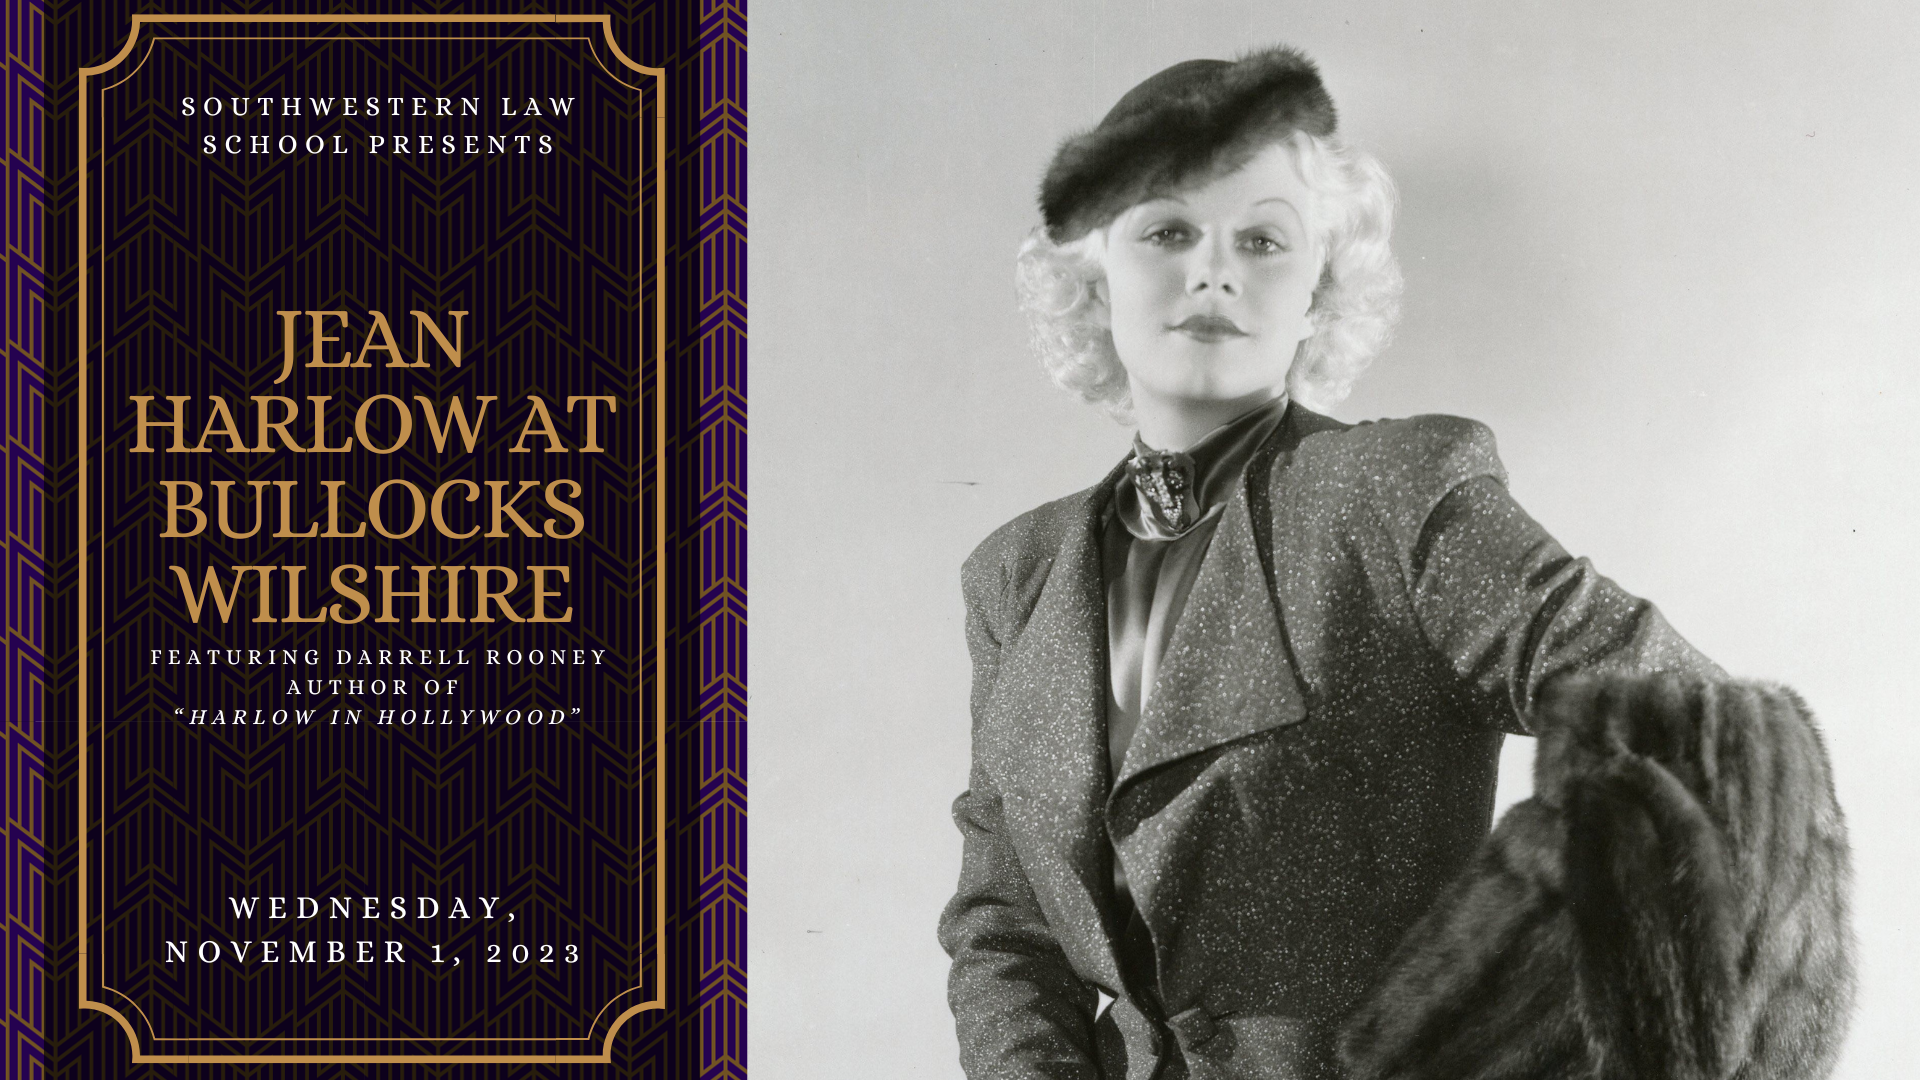 Jean Harlow at Bullocks Wilshire Featuring Darrell Rooney, Author of “Harlow in Hollywood” Wednesday, November 1, 2023, at 7:00 p.m. In-Person at Southwestern Campus